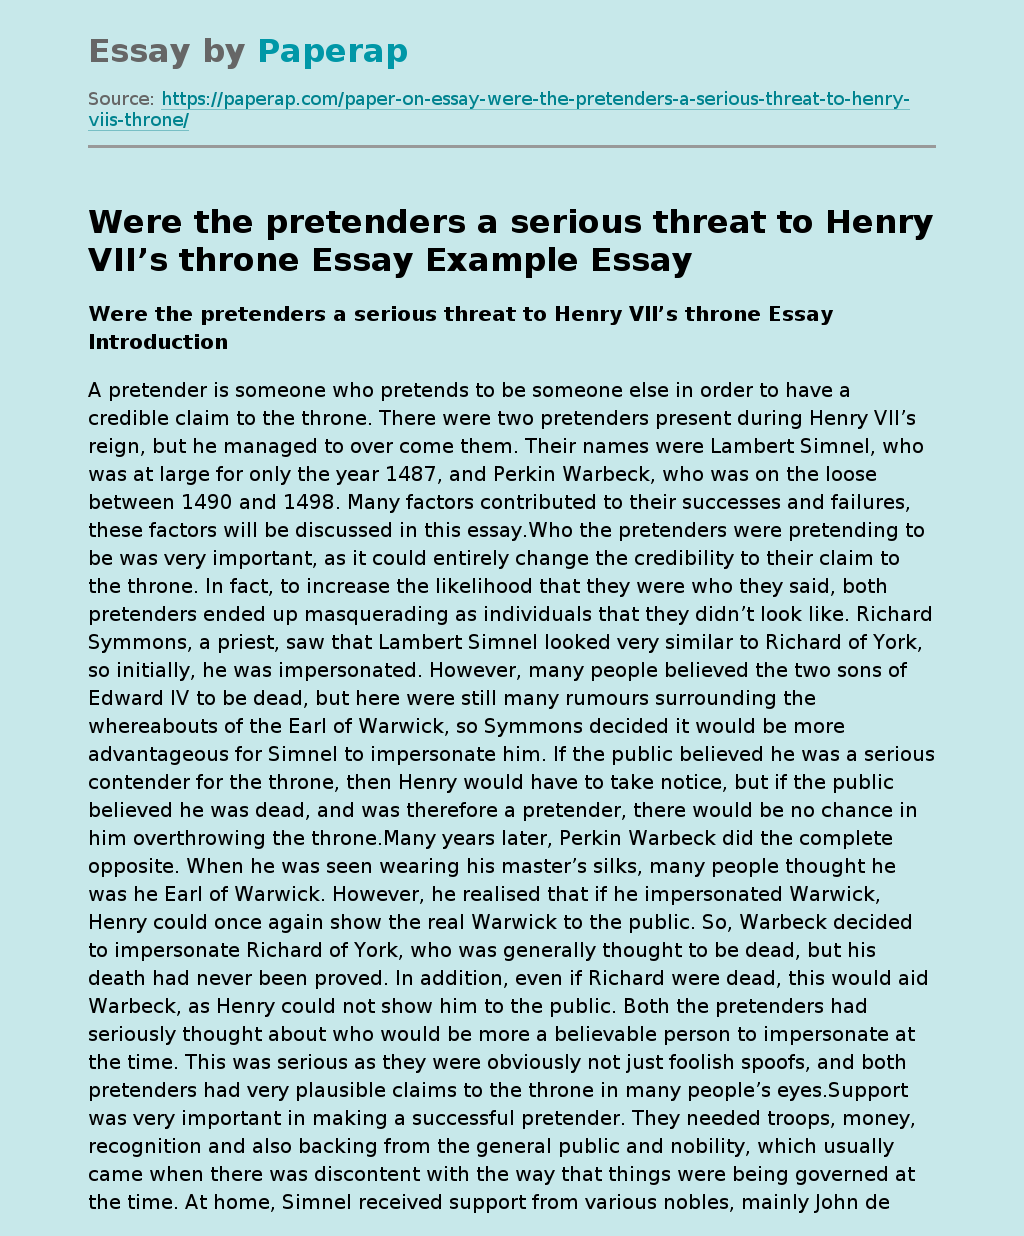 Were the Pretenders a Serious threat to Henry VII’s Throne Essay Example